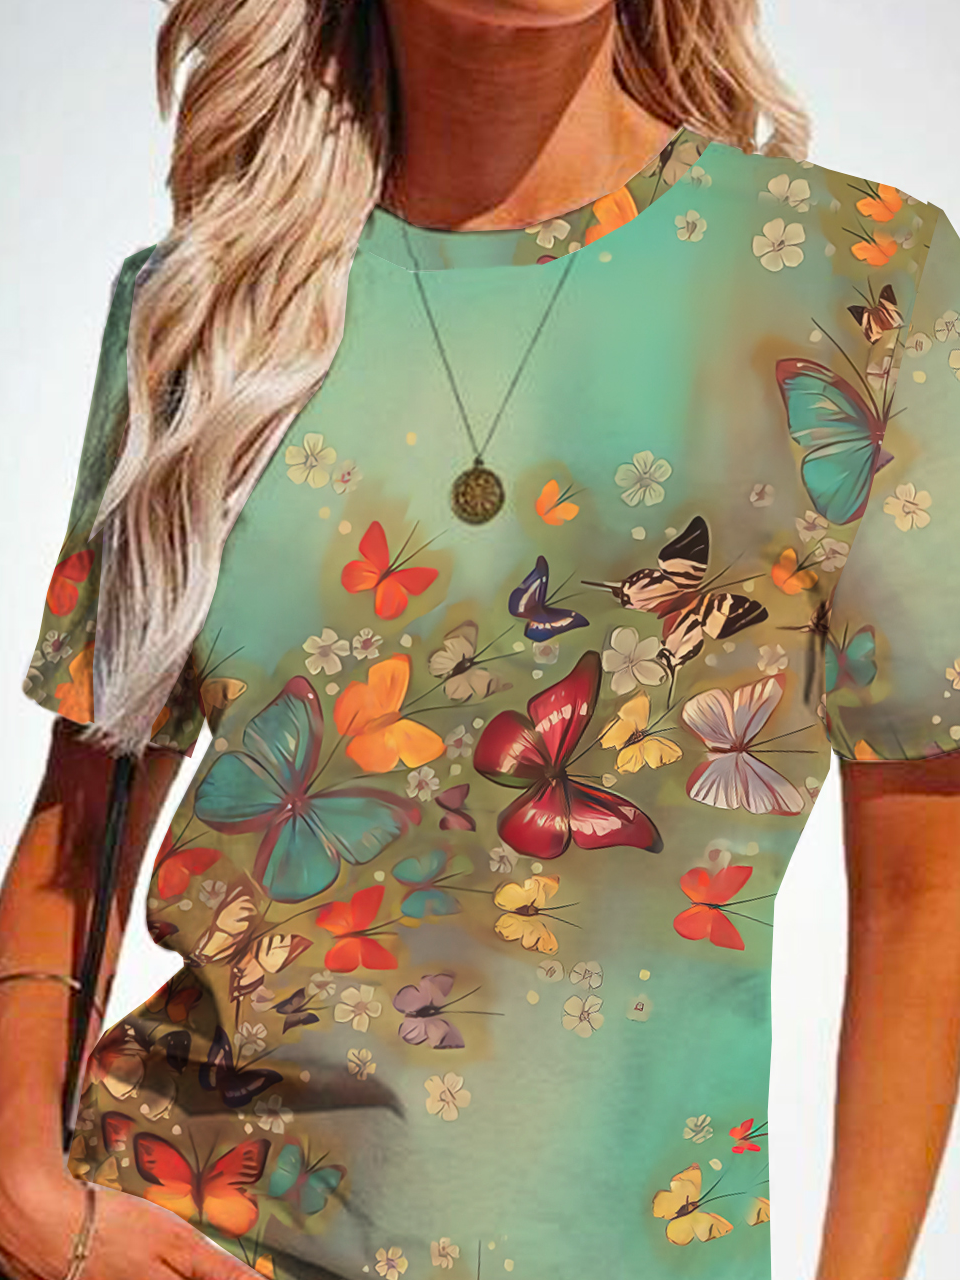 Crew Neck Butterfly Casual Jersey T-Shirt